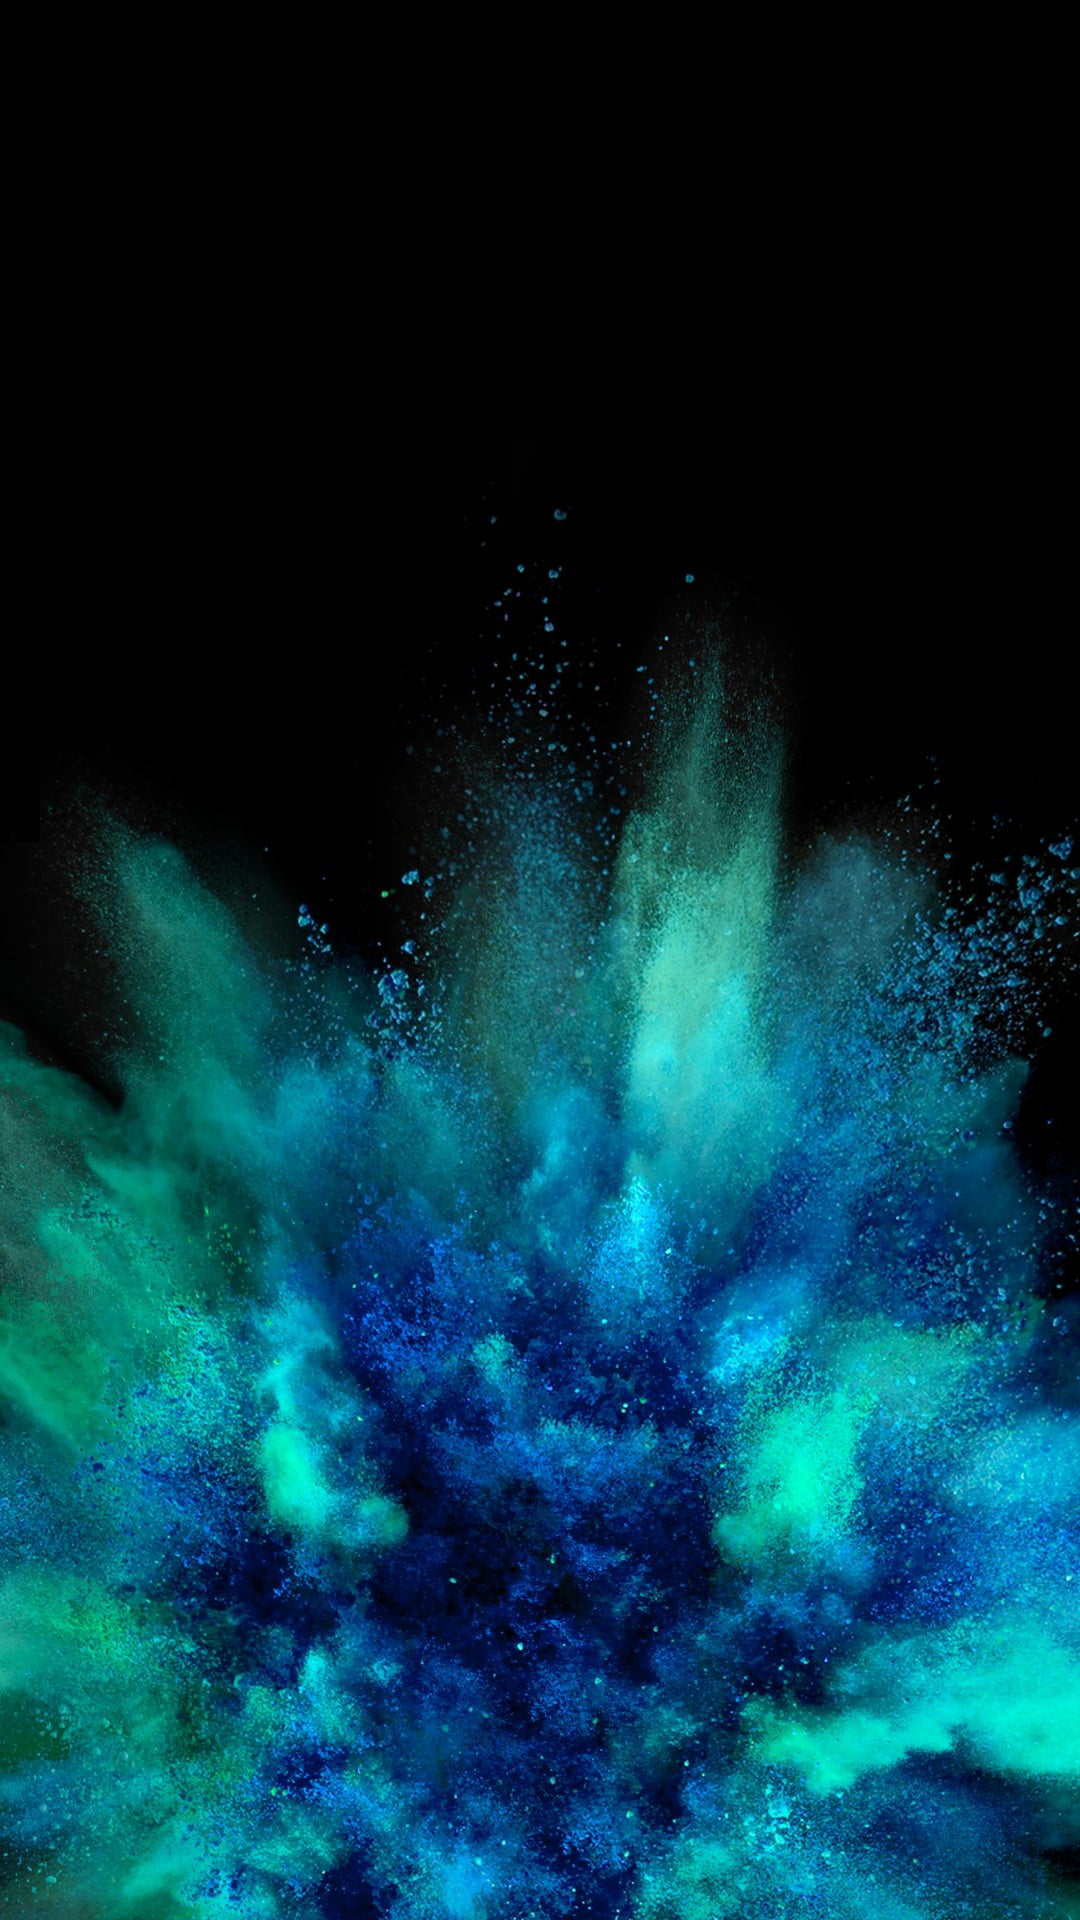 blue and green powder, teal and blue powders, explosion, colorful